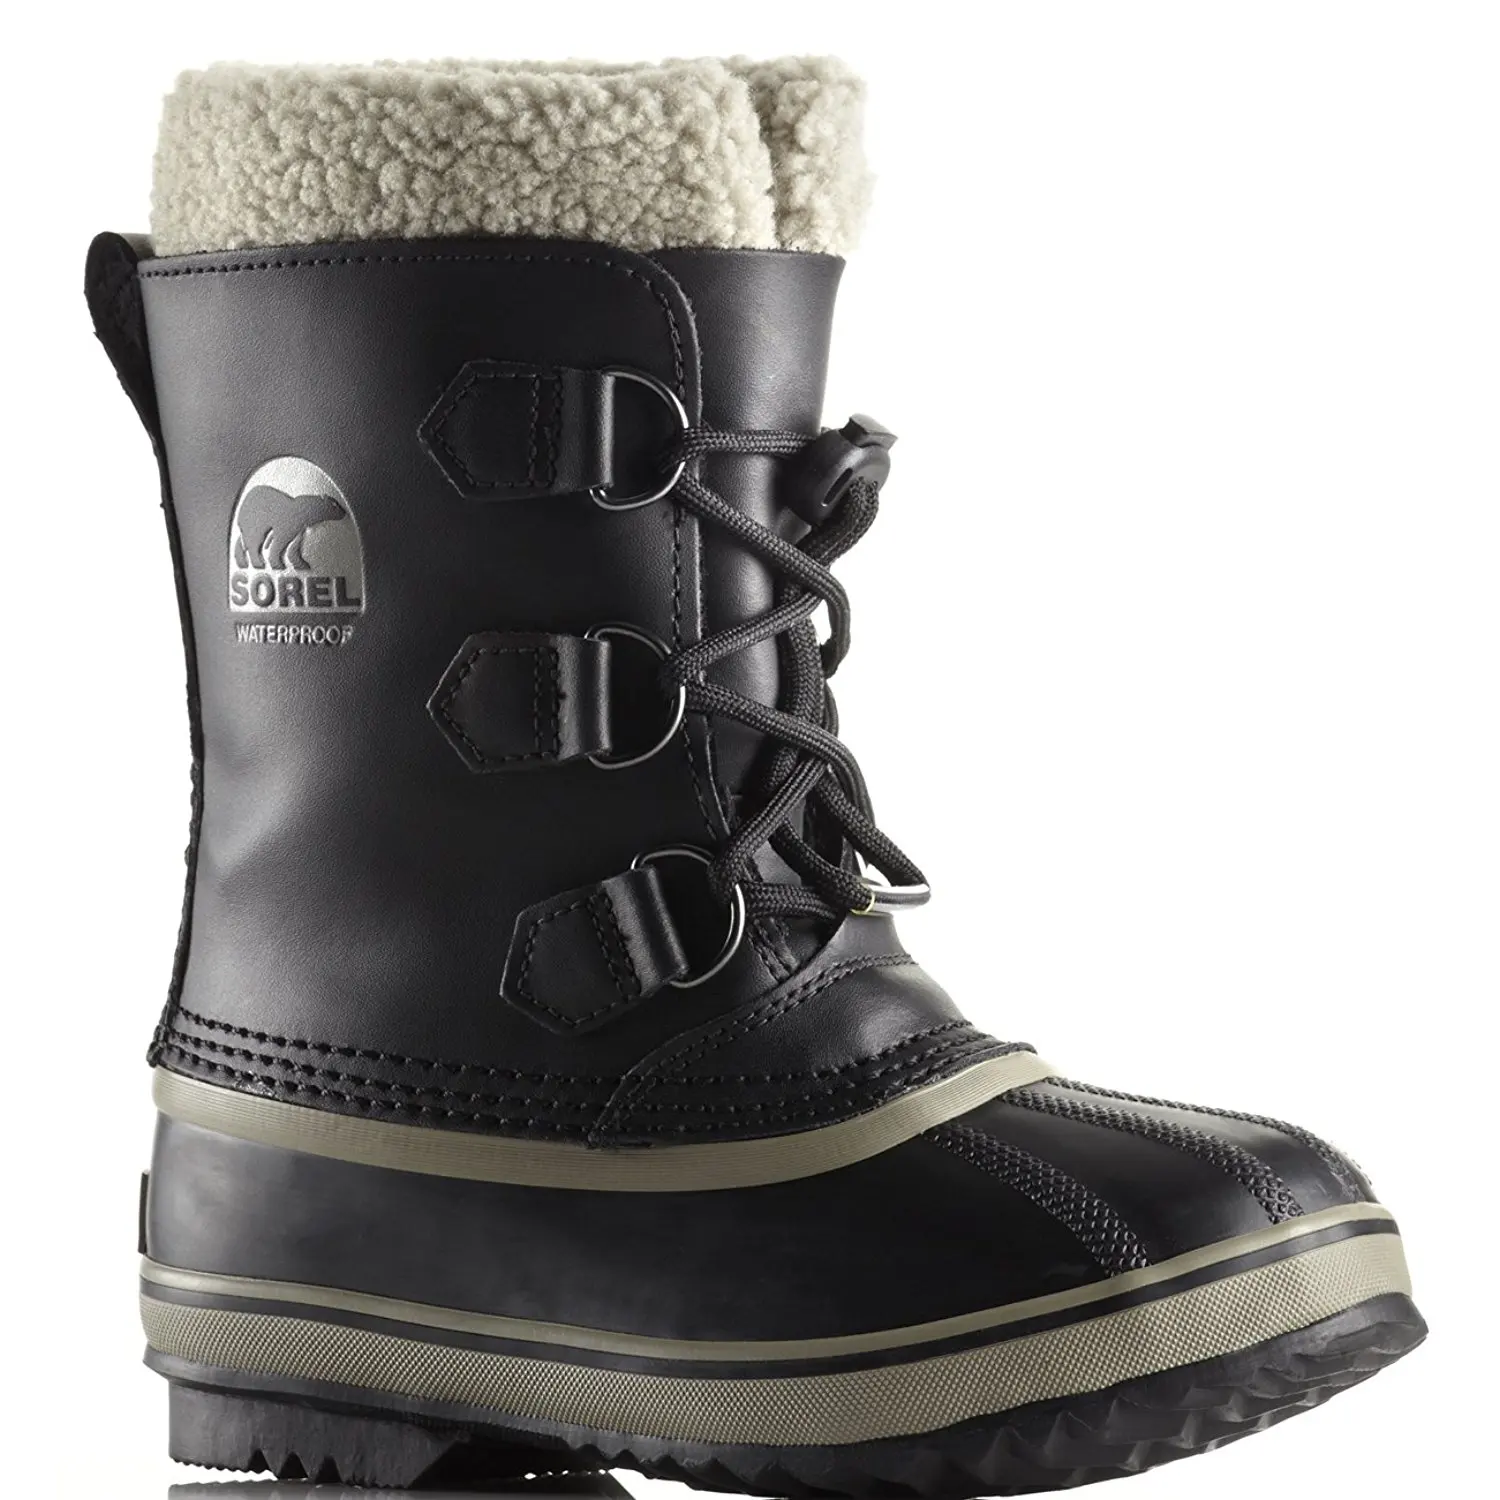 Cheap Cold Weather Hiking Boots, find Cold Weather Hiking Boots deals on line at Alibaba.com